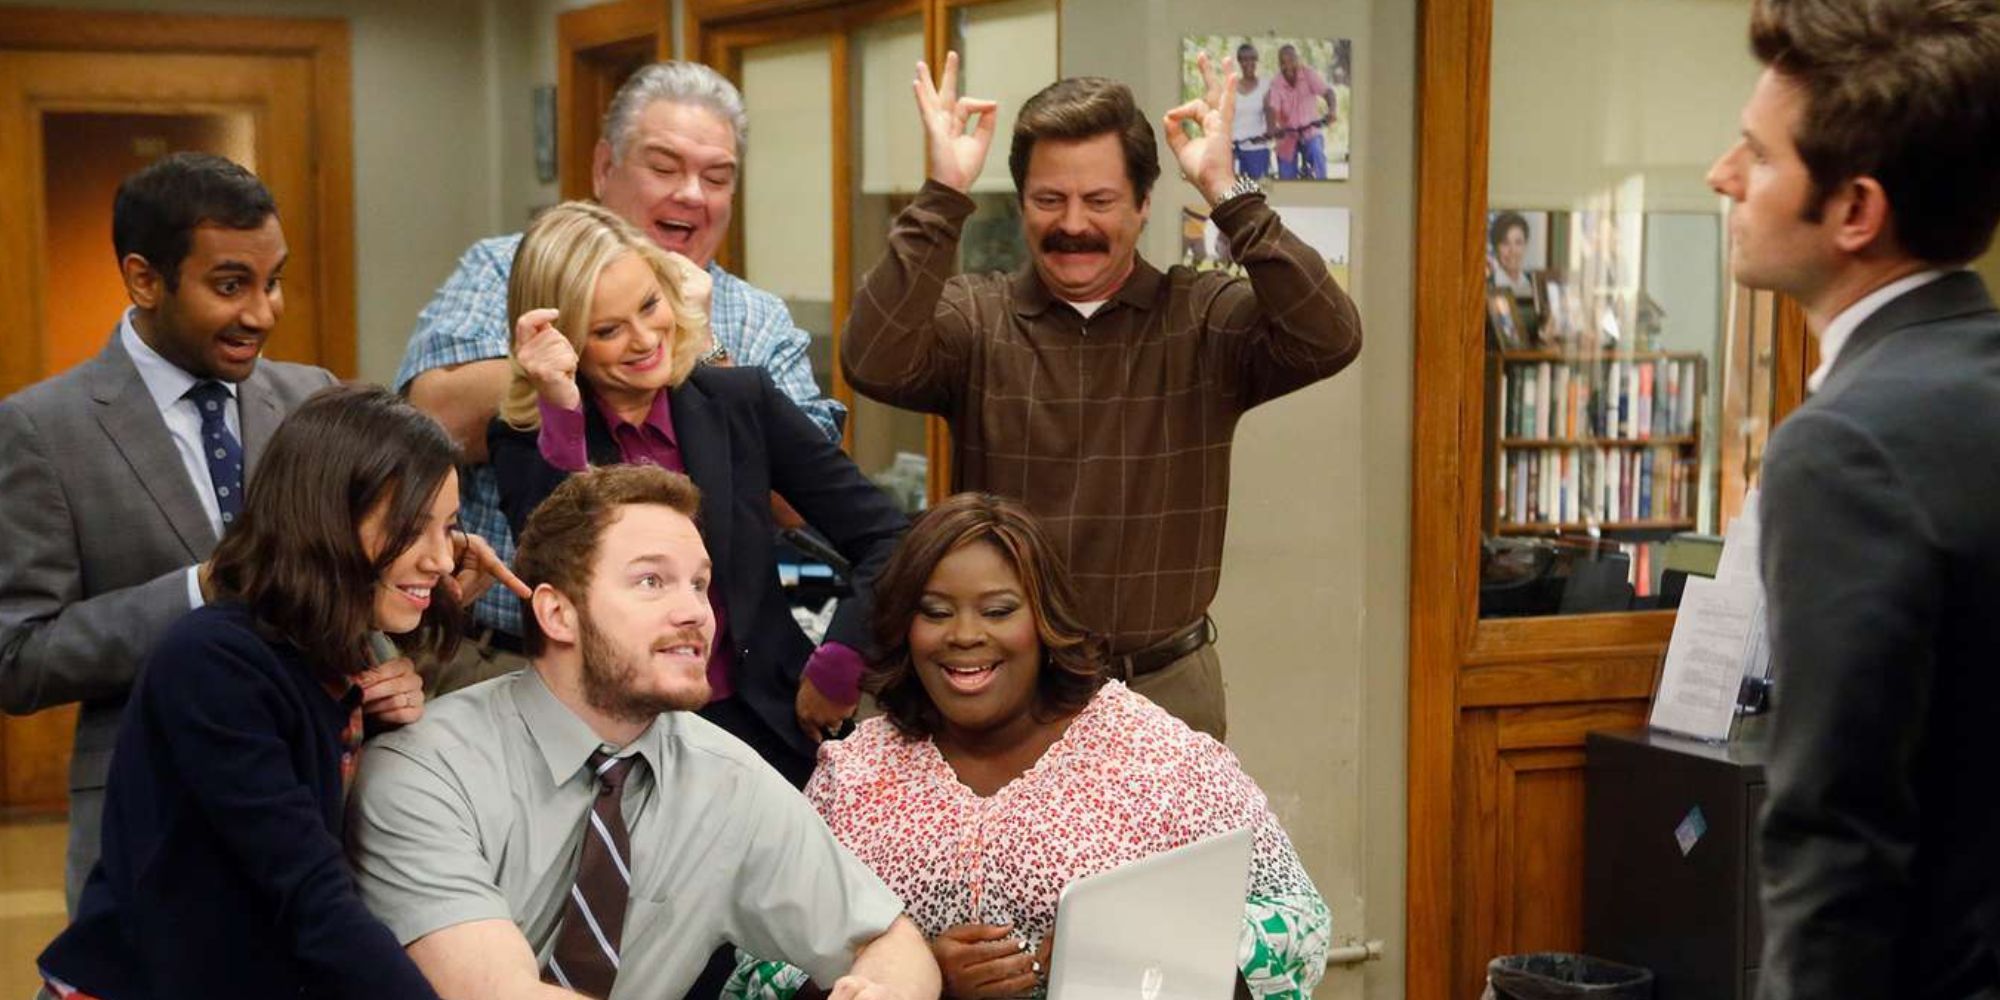 The cast of Parks and Recreation celebrating in their office